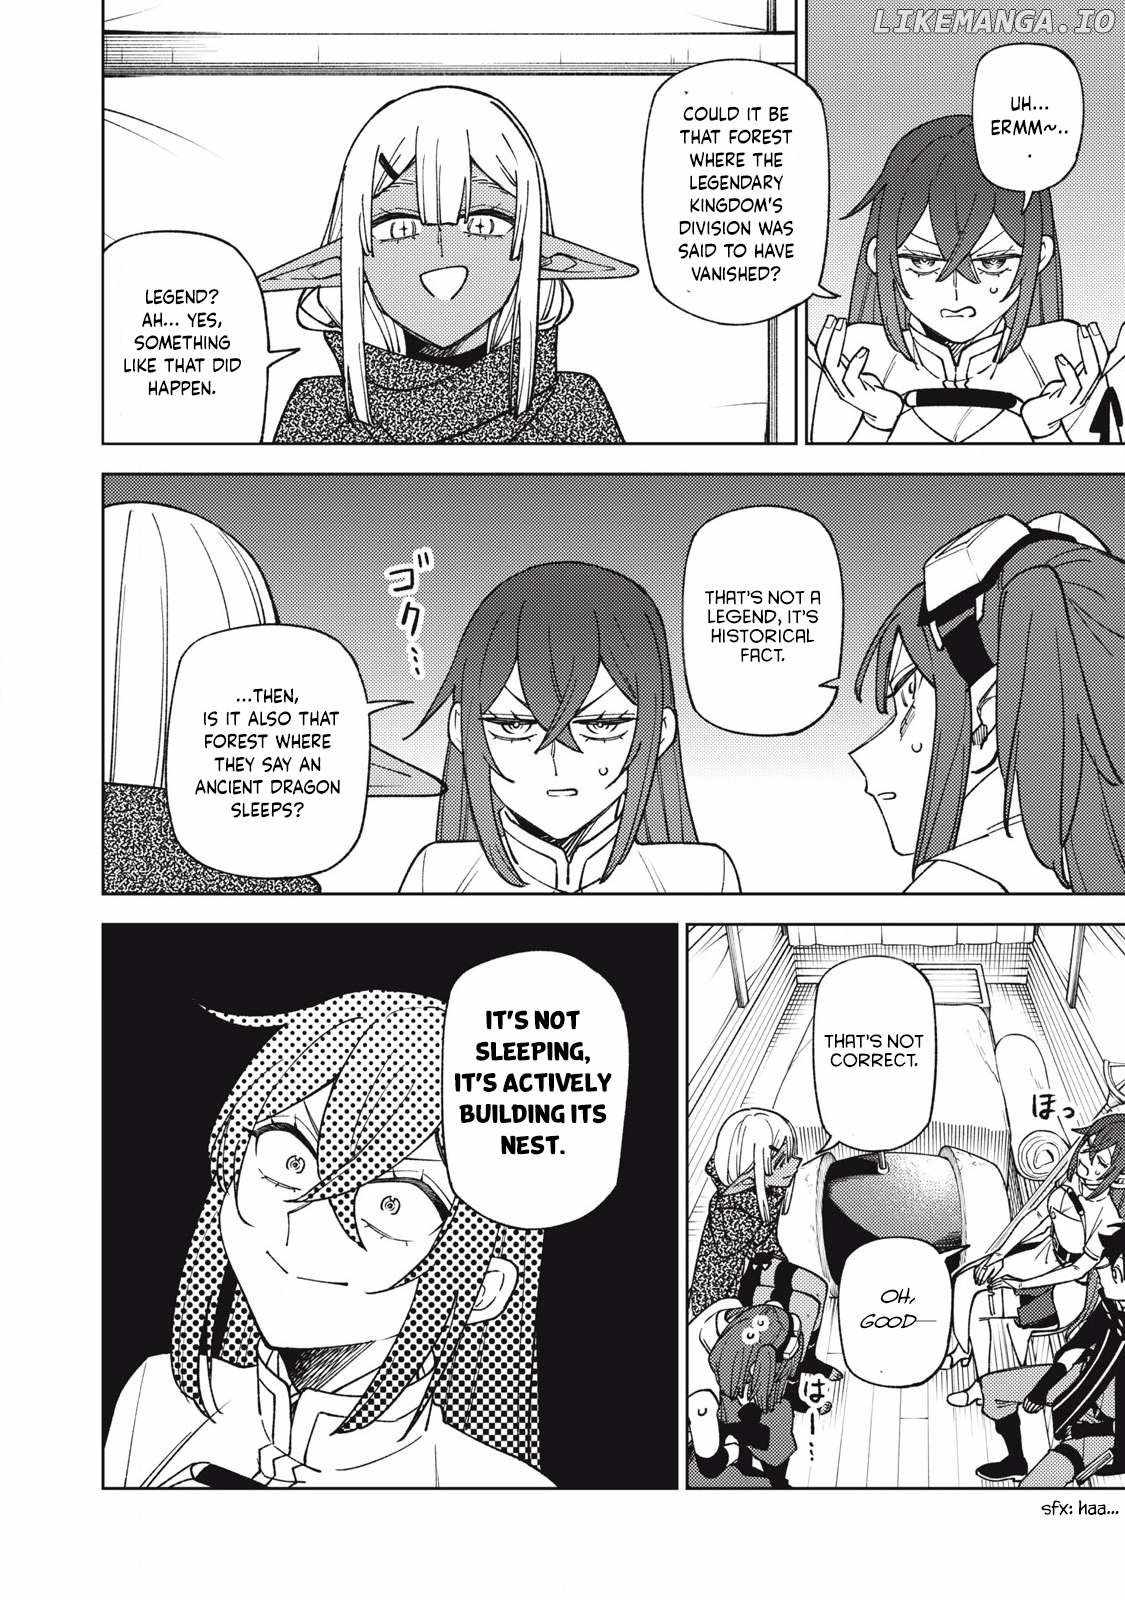 read My S-Rank Party Fired Me for Being a Cursificer ~ I Can Only Make “Cursed Items”, but They're Artifact Class! Chapter 32-2 Manga Online Free at Mangabuddy, MangaNato,Manhwatop | MangaSo.com